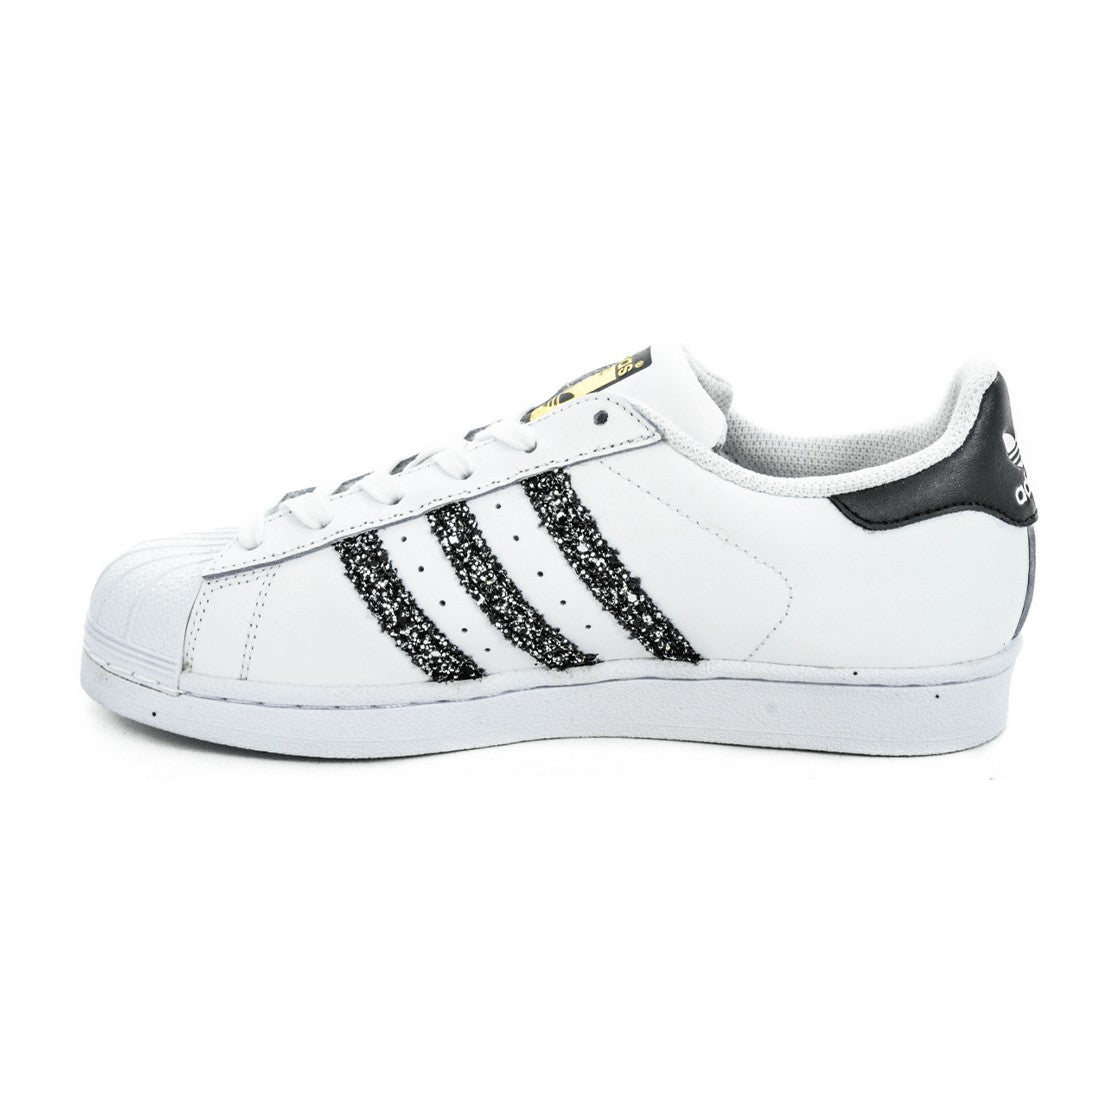 ADIDAS SUPERSTAR PERSONALIZZATE MICKY